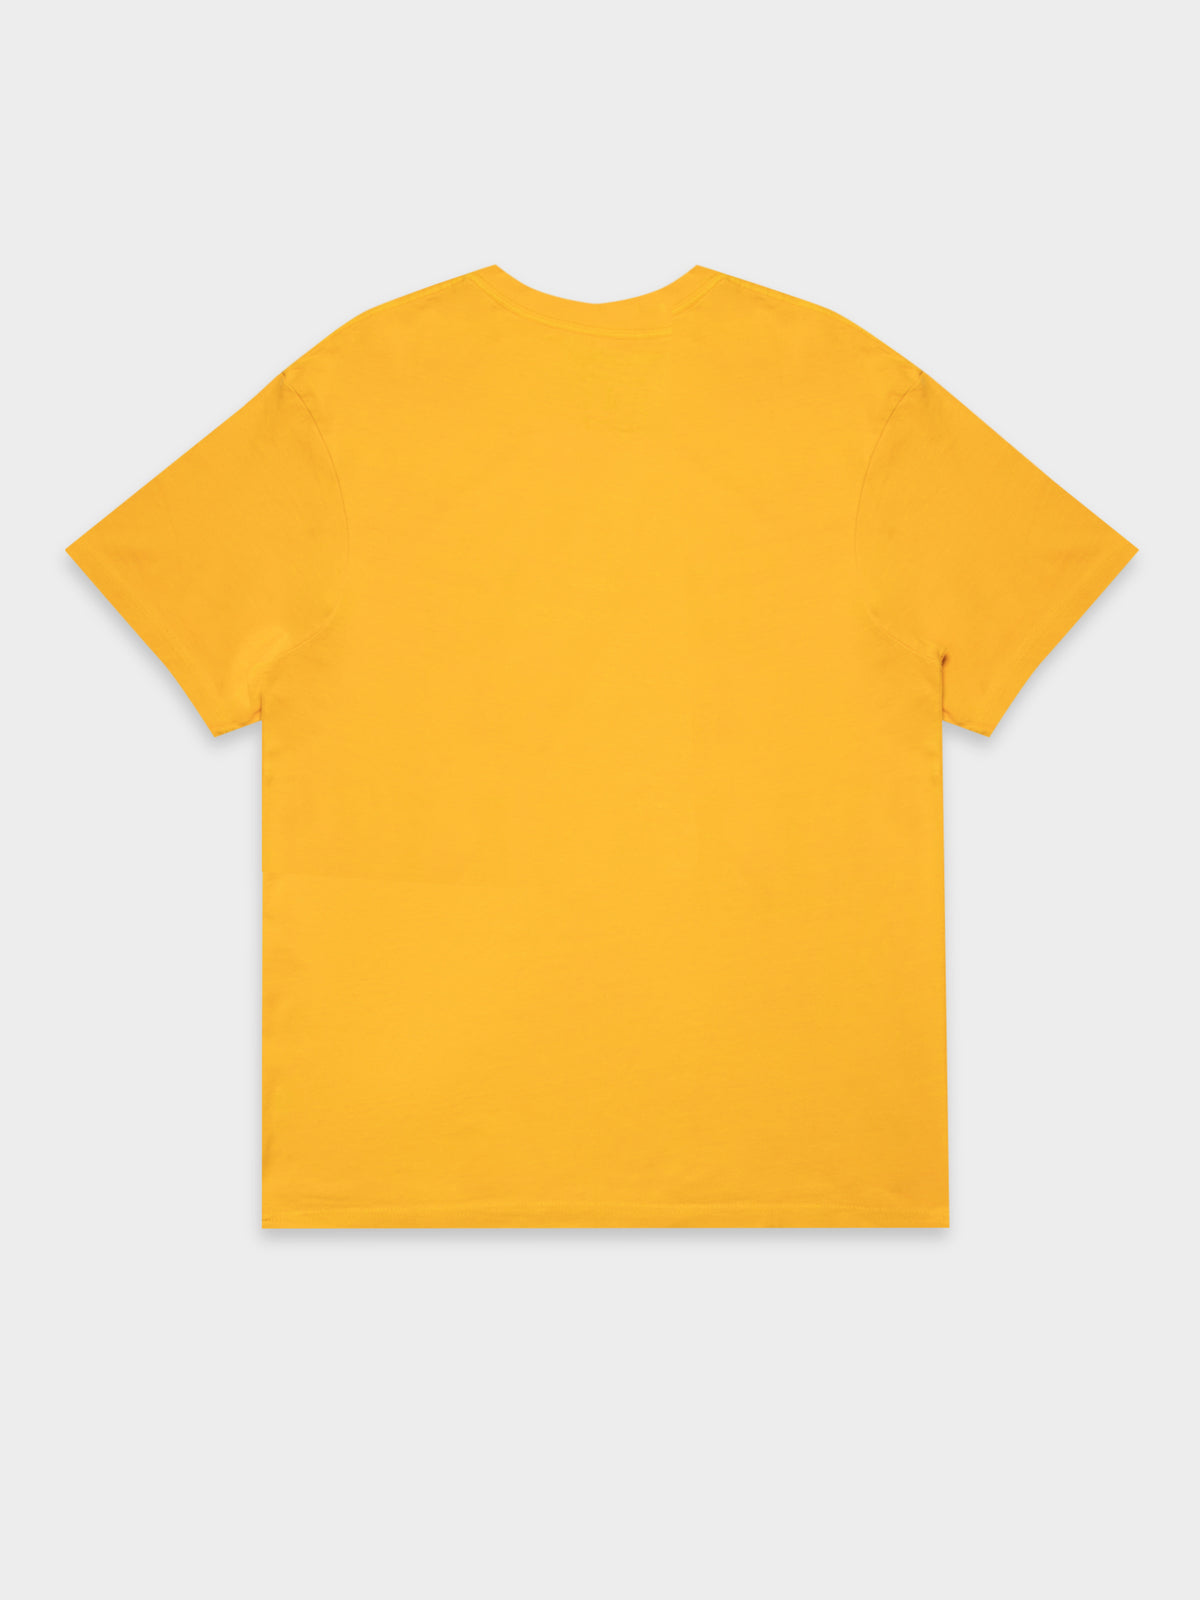 LA Lakers Vintage T-Shirt in Yellow